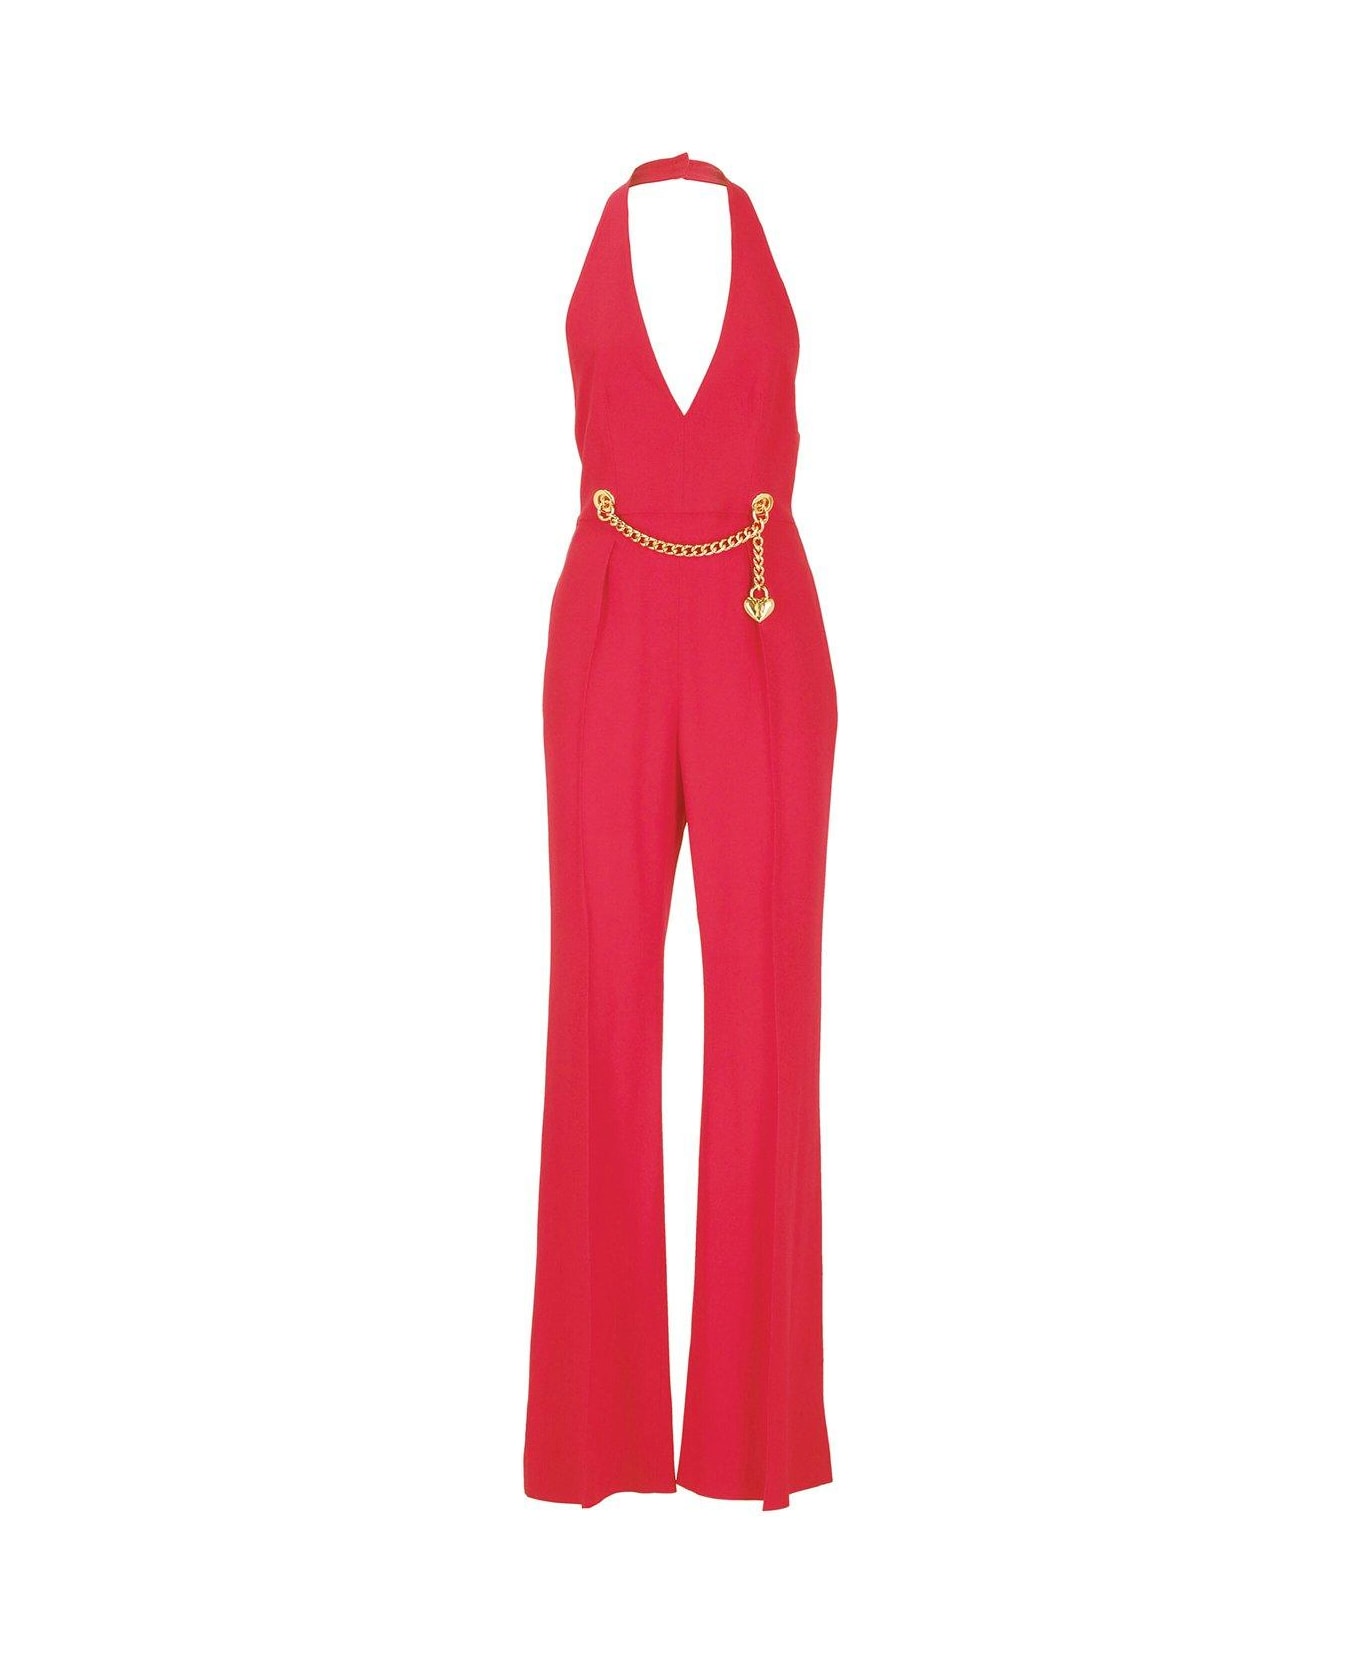 Moschino Chain-embellished Open-back Haltrneck Jumpsuit Moschino - RED ジャンプスーツ